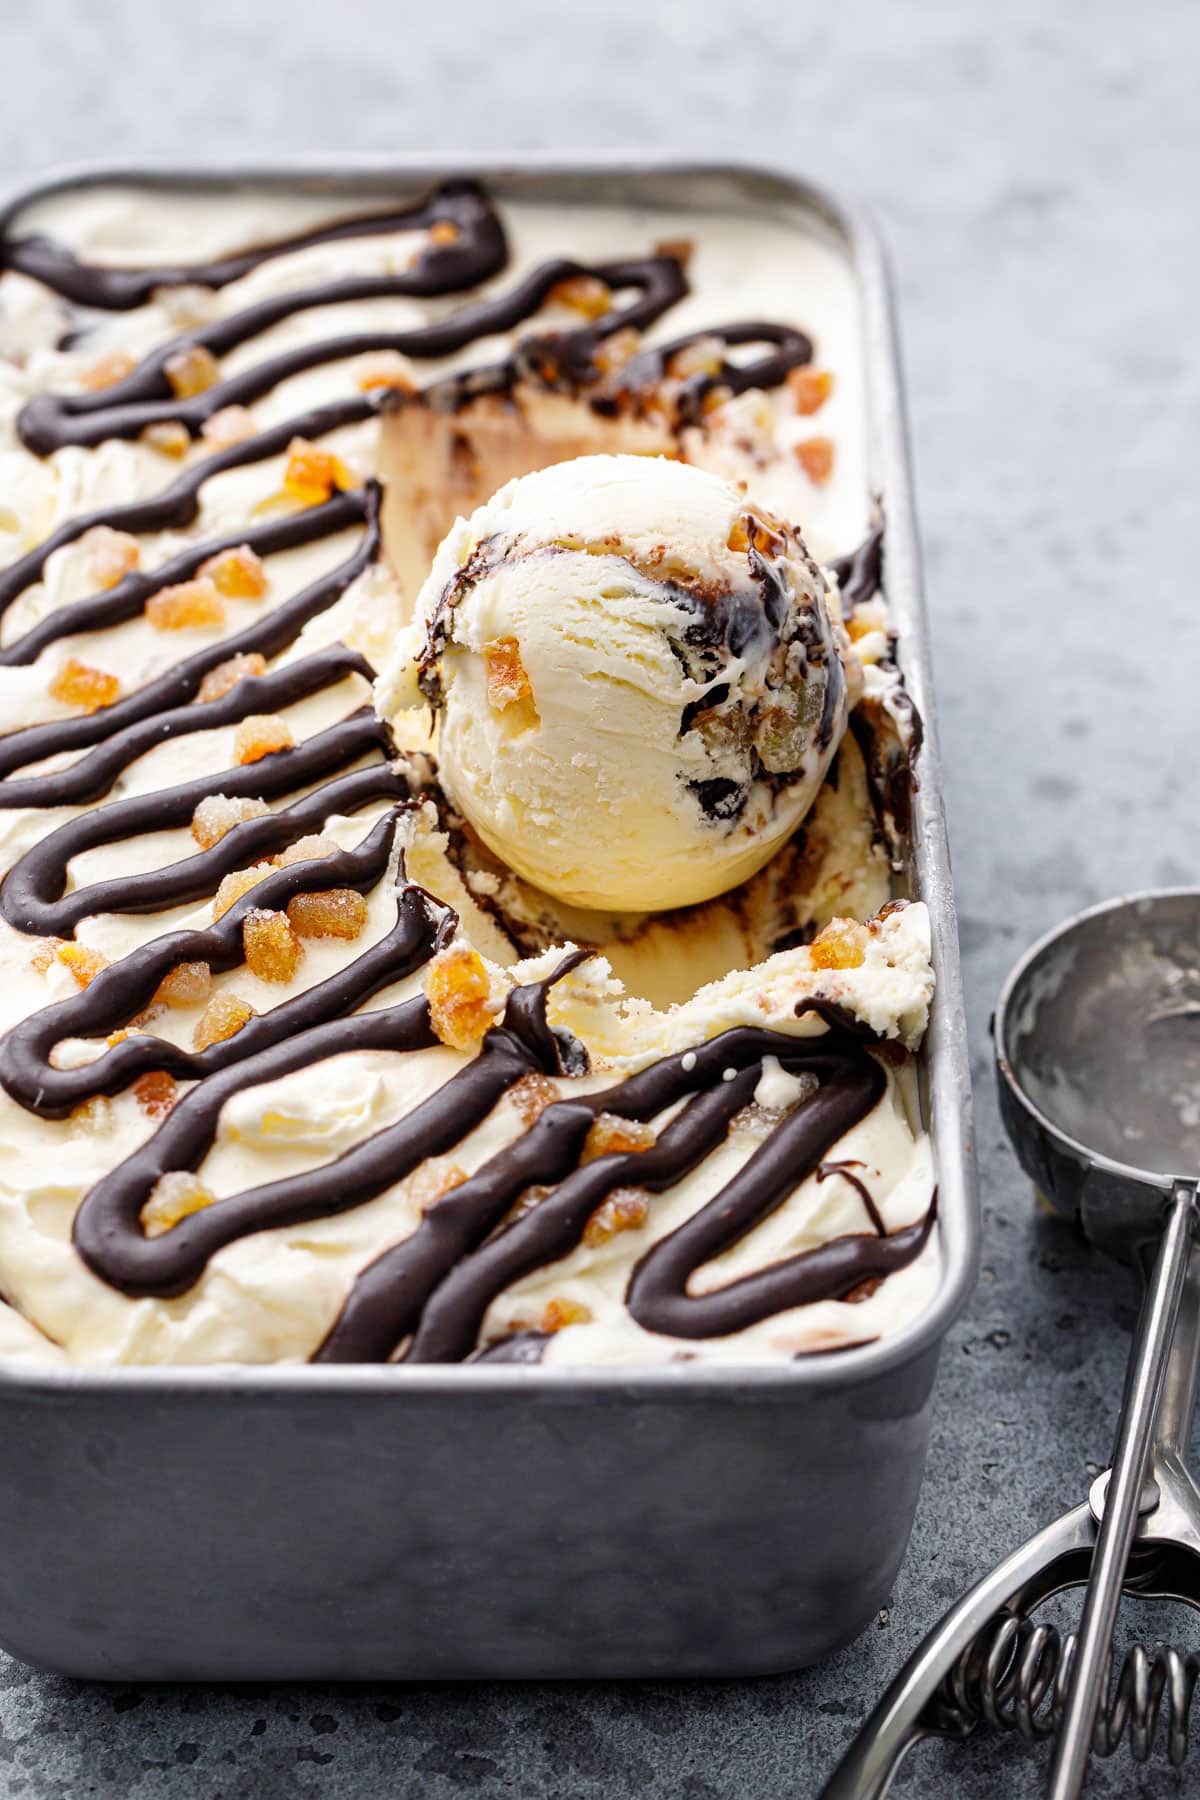 One round scoop sitting in a silver pan with Candied Orange Ice Cream with Chocolate Fudge Swirl, ice cream scoop on the side.